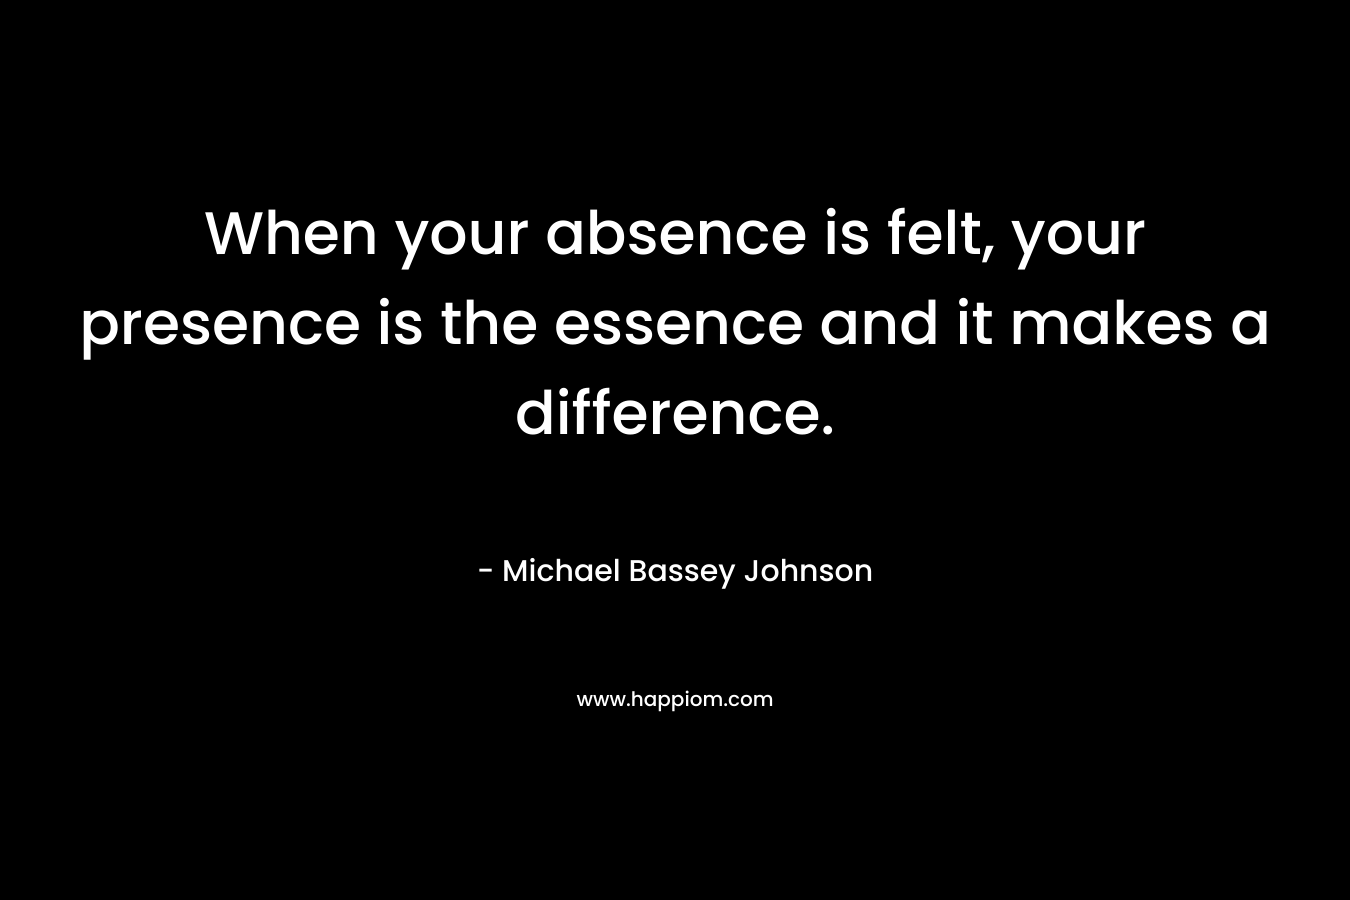 When your absence is felt, your presence is the essence and it makes a difference.